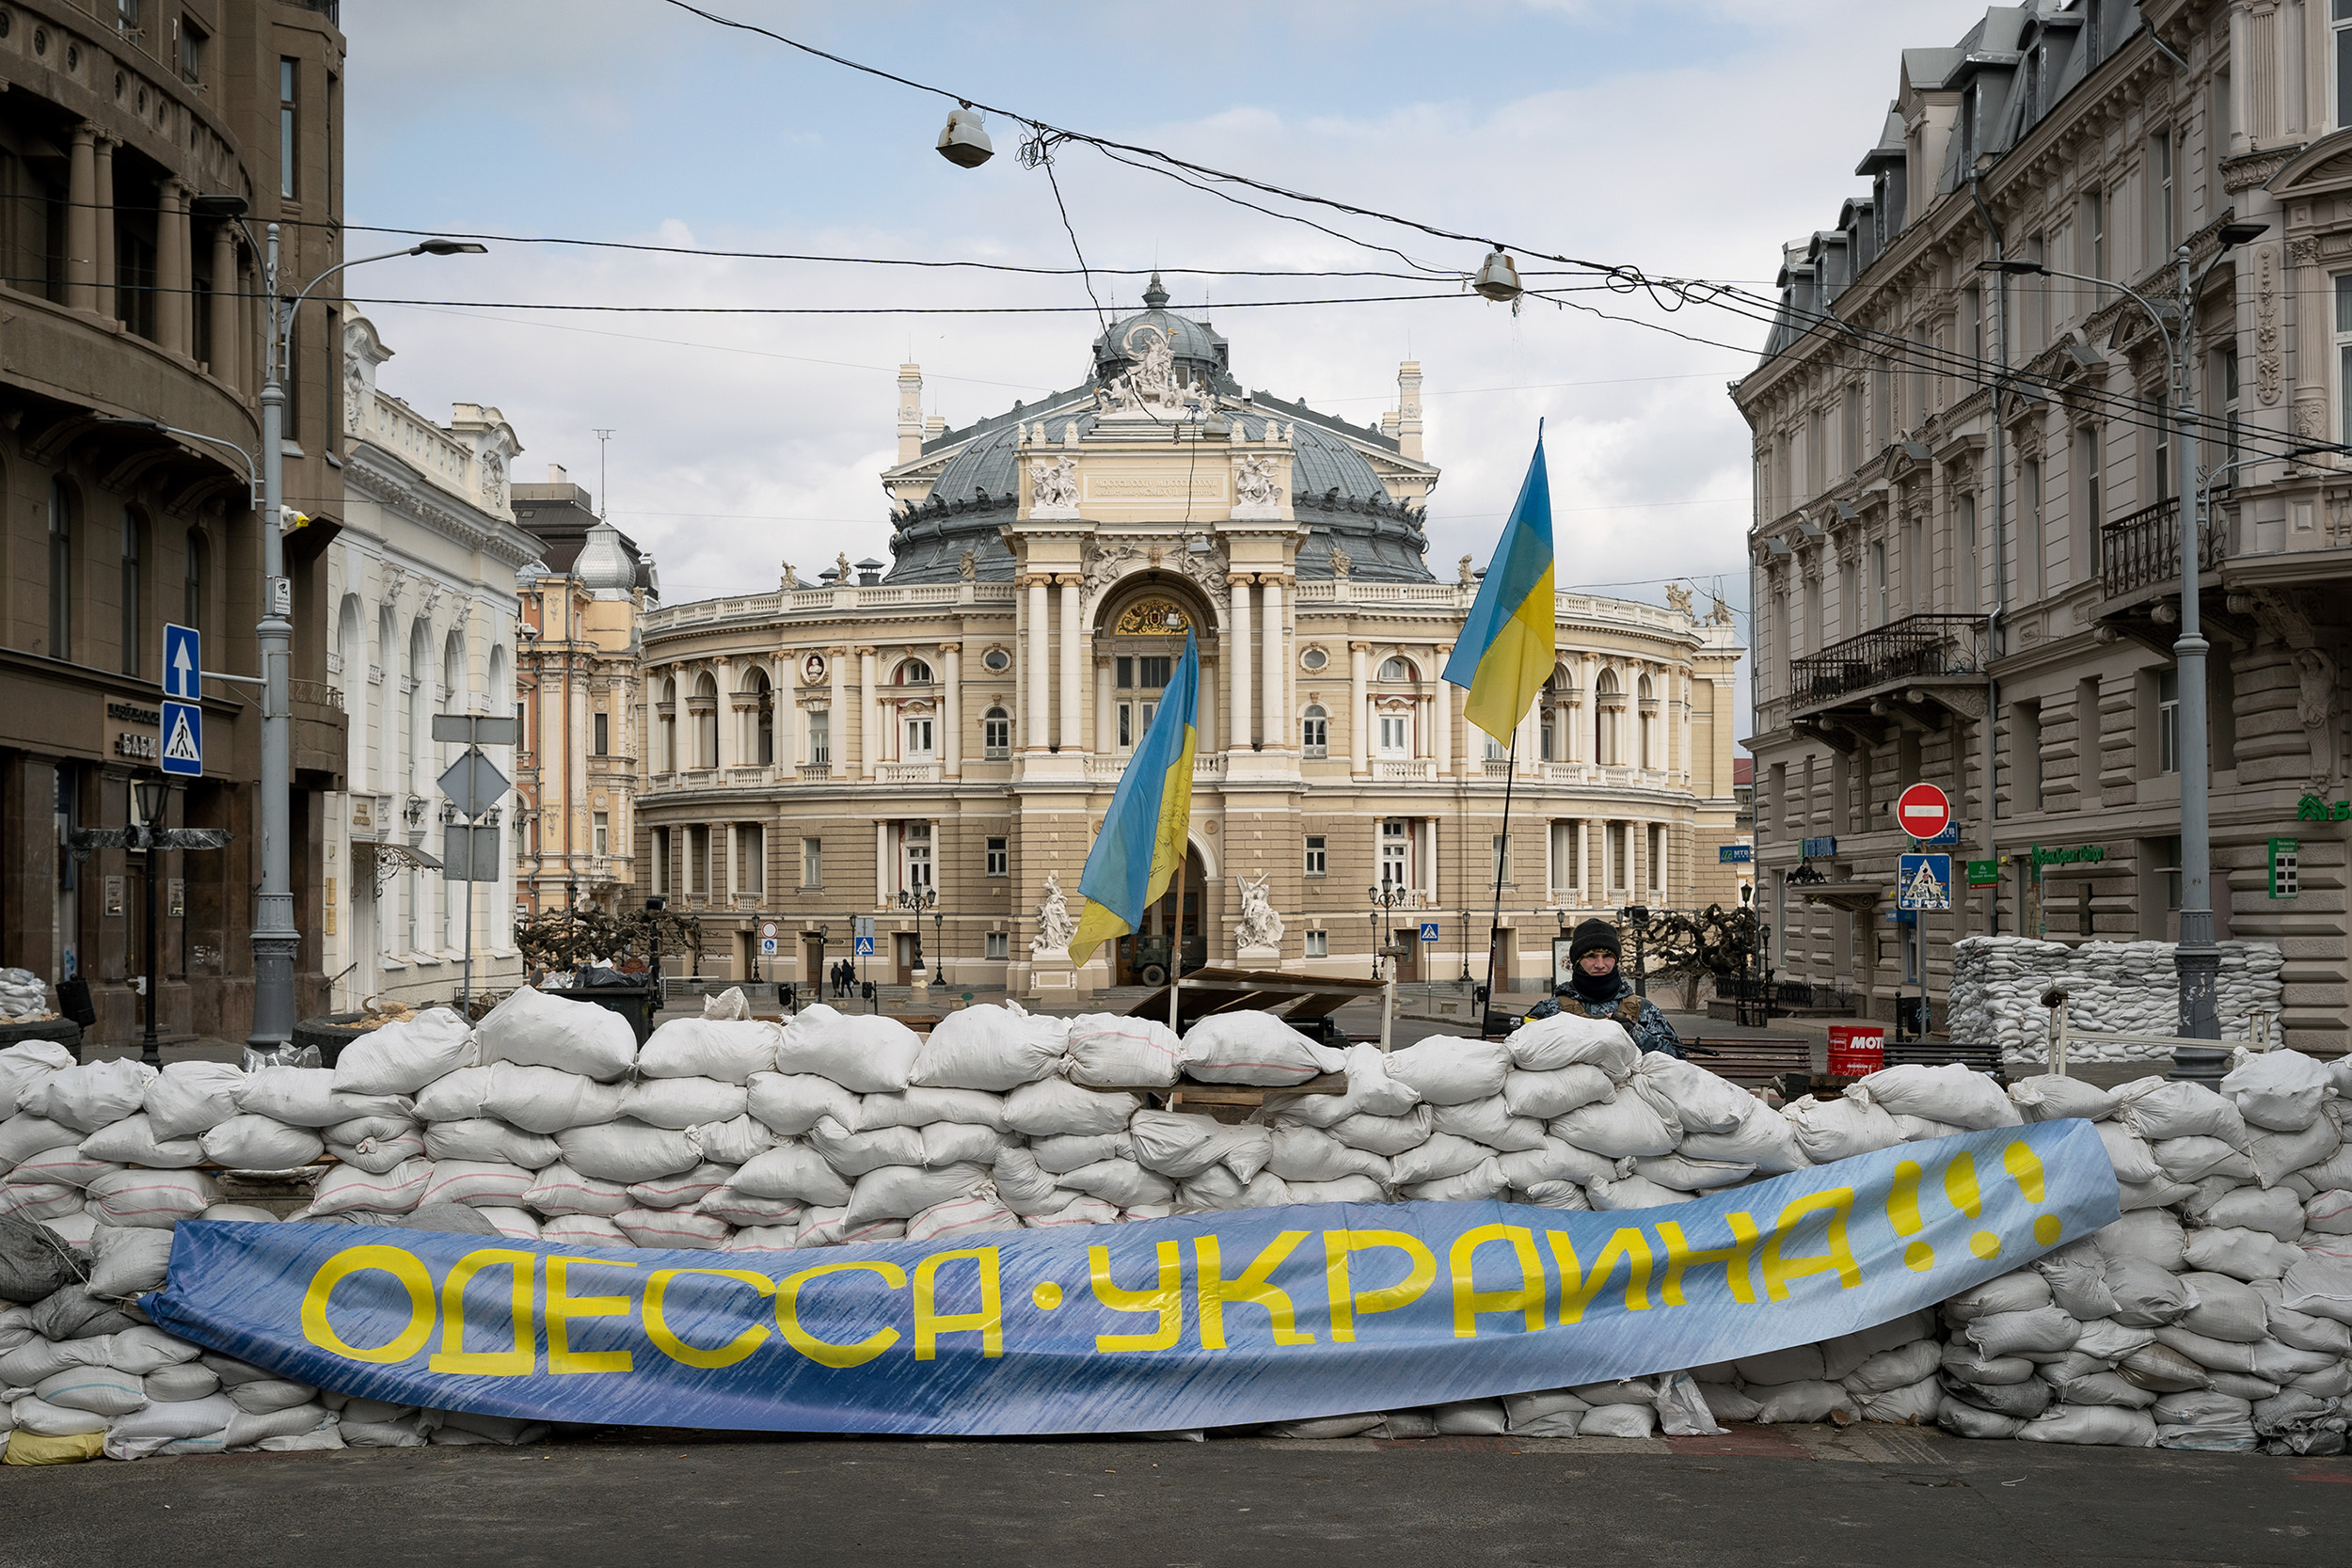 Barricades in front of Odesa Opera house, Ukraine, on March 8.